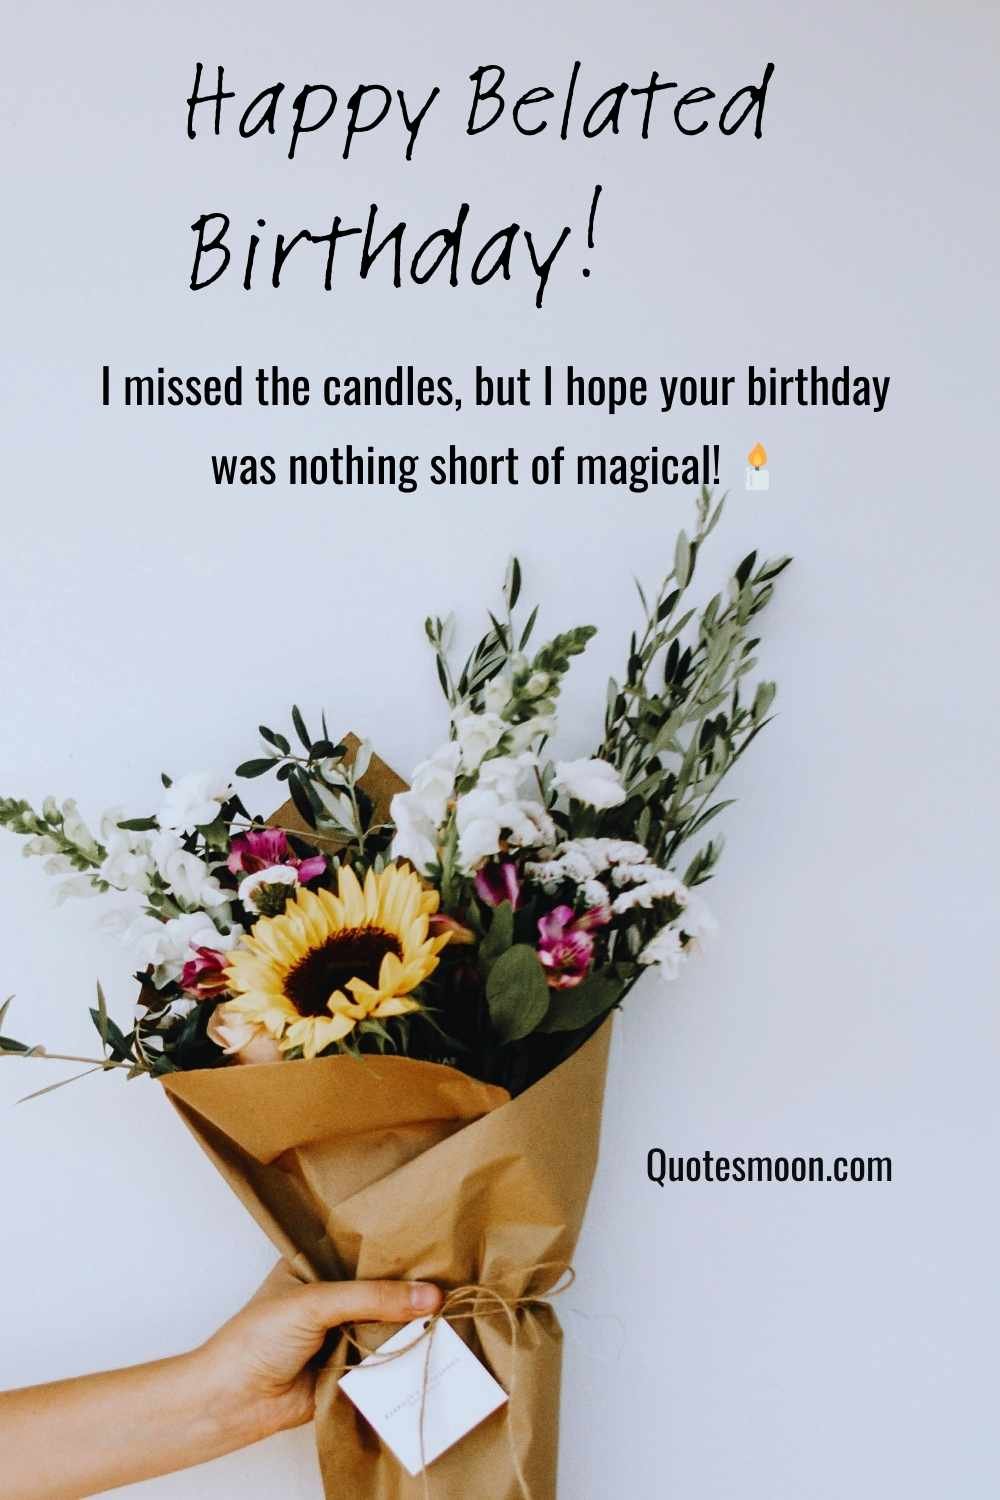 belated birthday images wishes with flowers HD